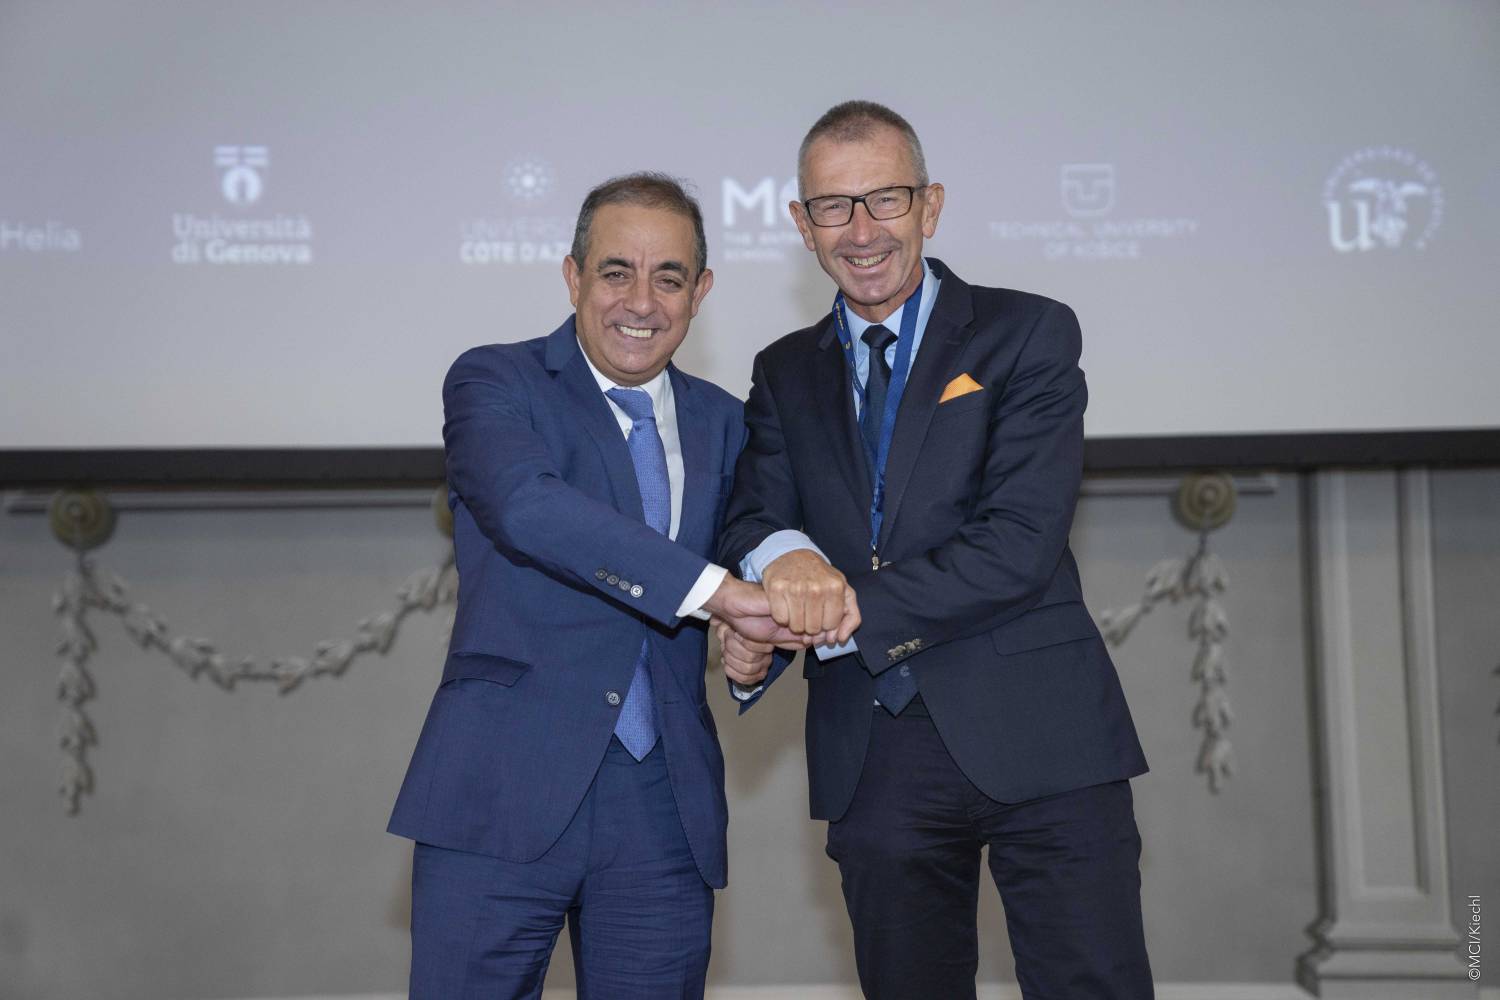 Rector of the University of Seville Miguel Angel Castro Arroyo and Rector of MCI Andreas Altmann. ©MCI_Kiechl